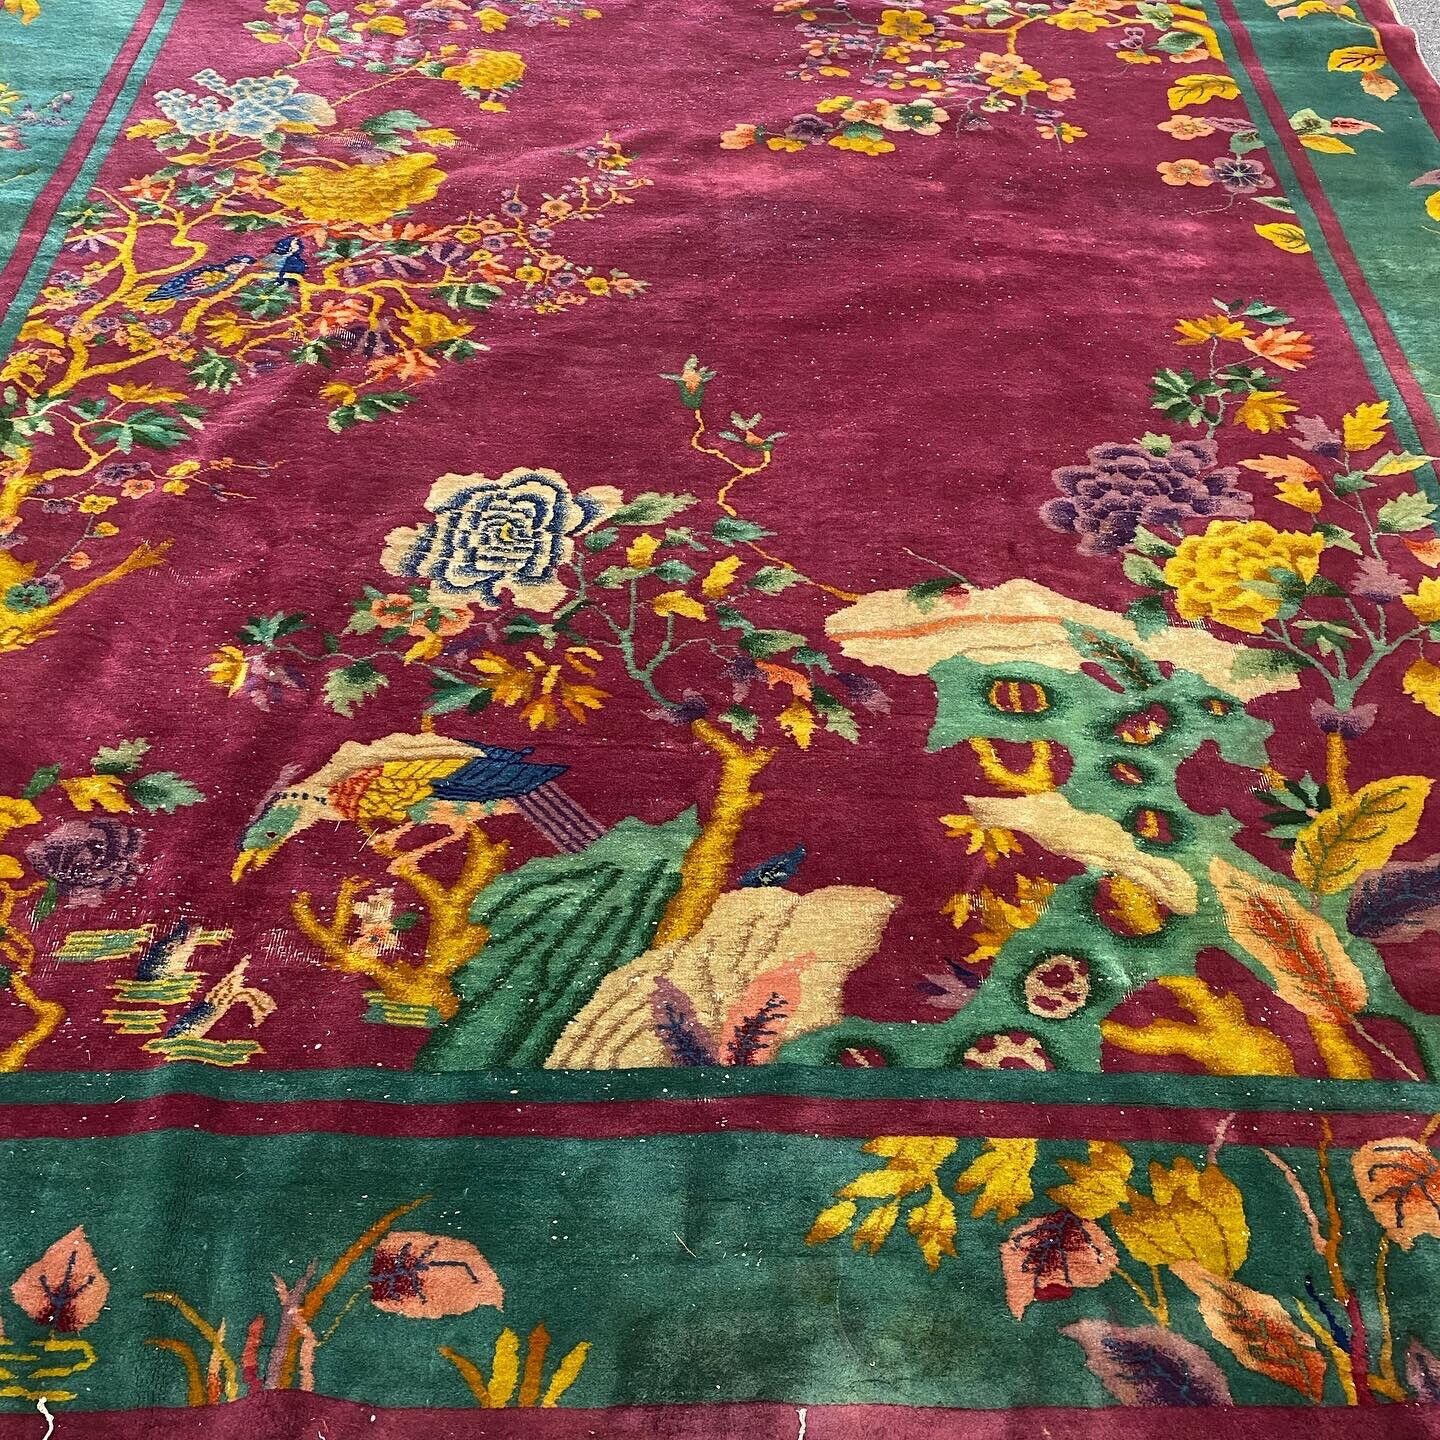 antique art deco chinese rug in good condition #9352 8.11x11.7